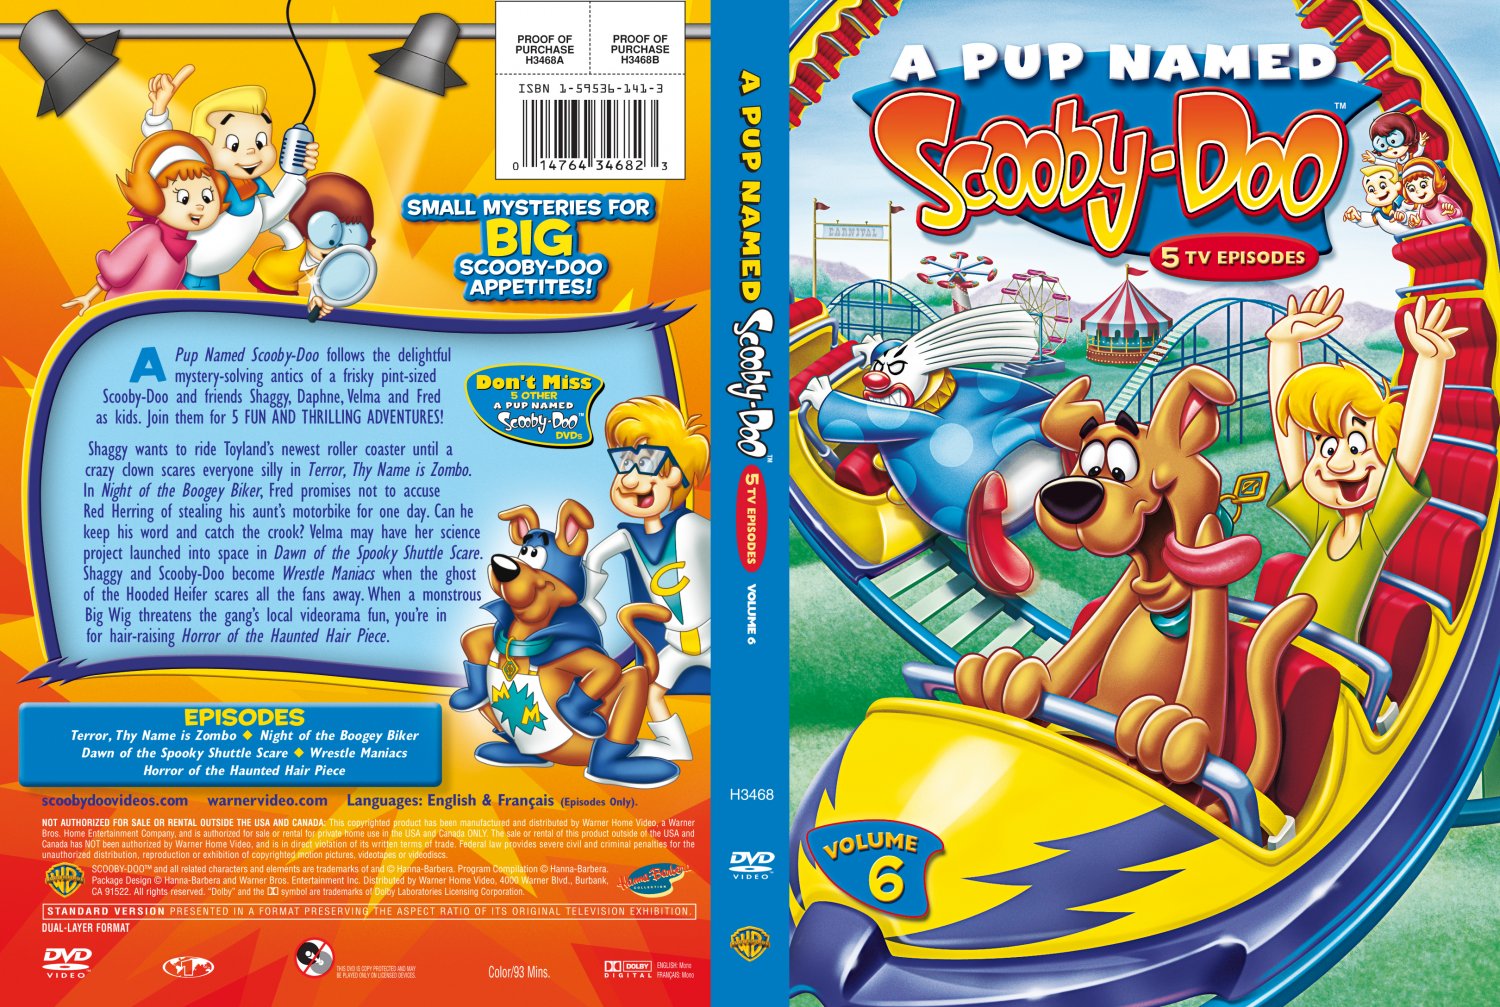 Pup named scooby doo theme